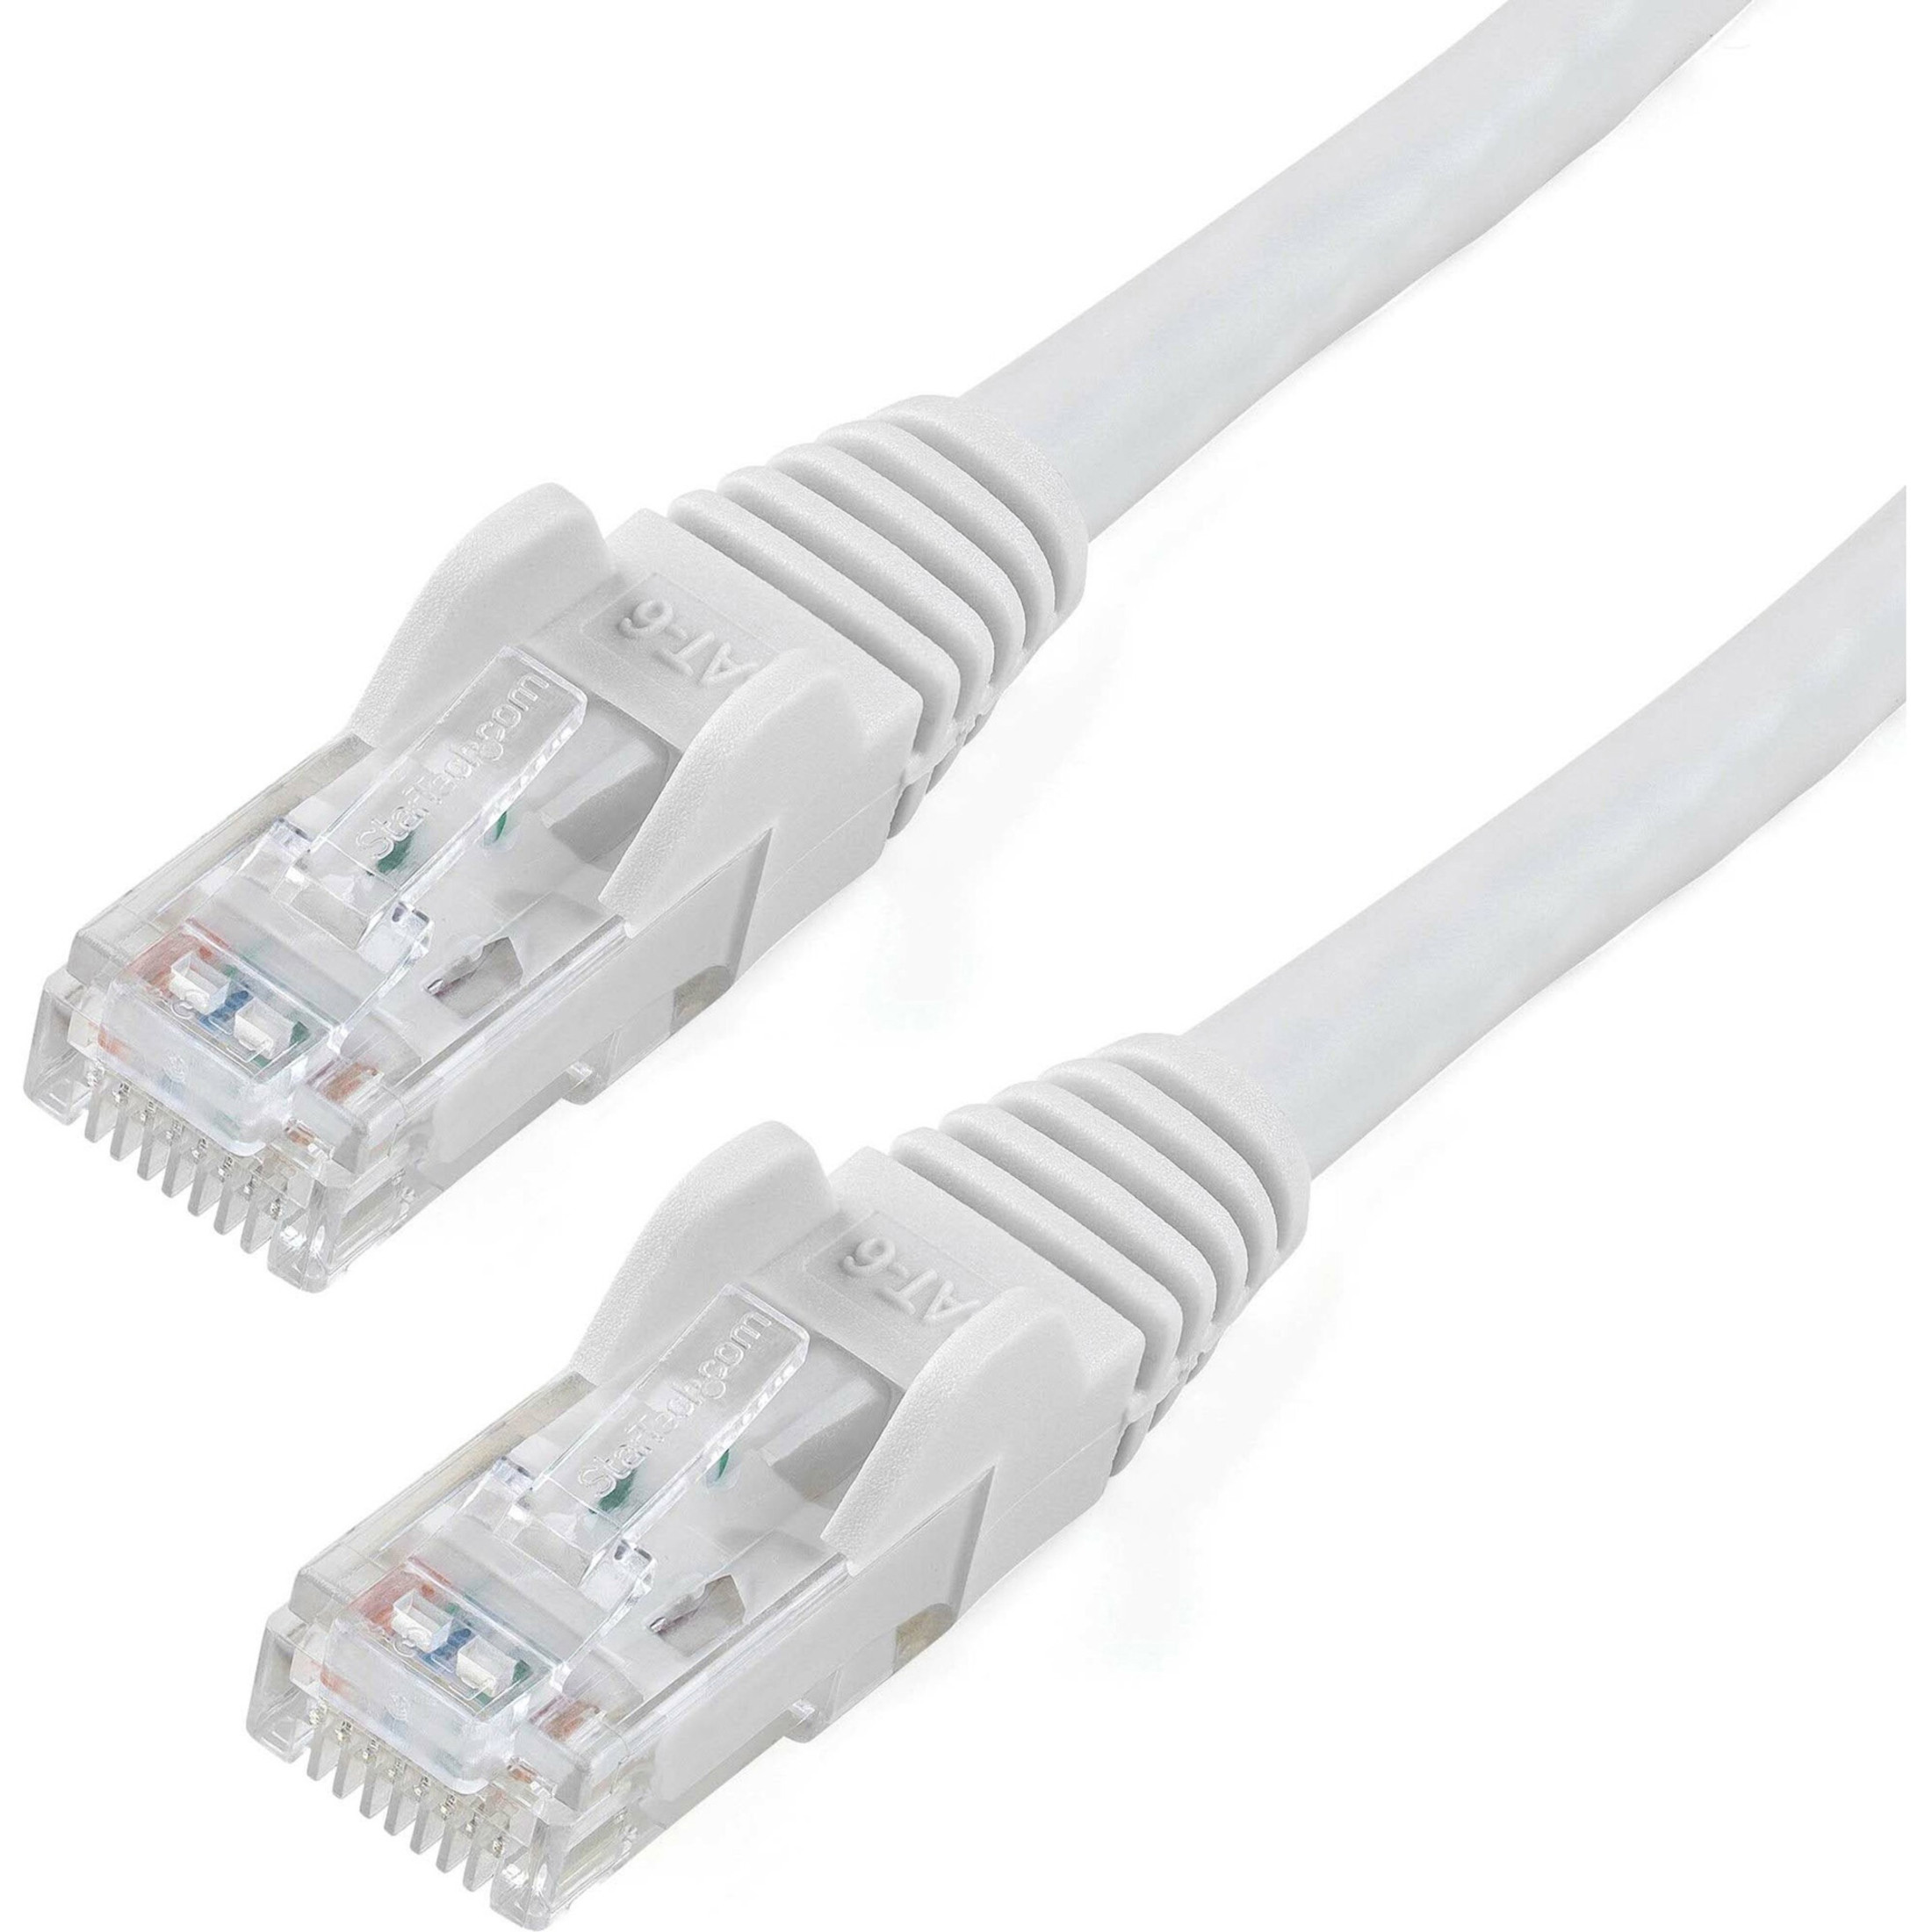 Startech .com 75ft CAT6 Ethernet CableWhite Snagless Gigabit100W PoE UTP 650MHz Category 6 Patch Cord UL Certified Wiring/TIA75ft Wh… N6PATCH75WH